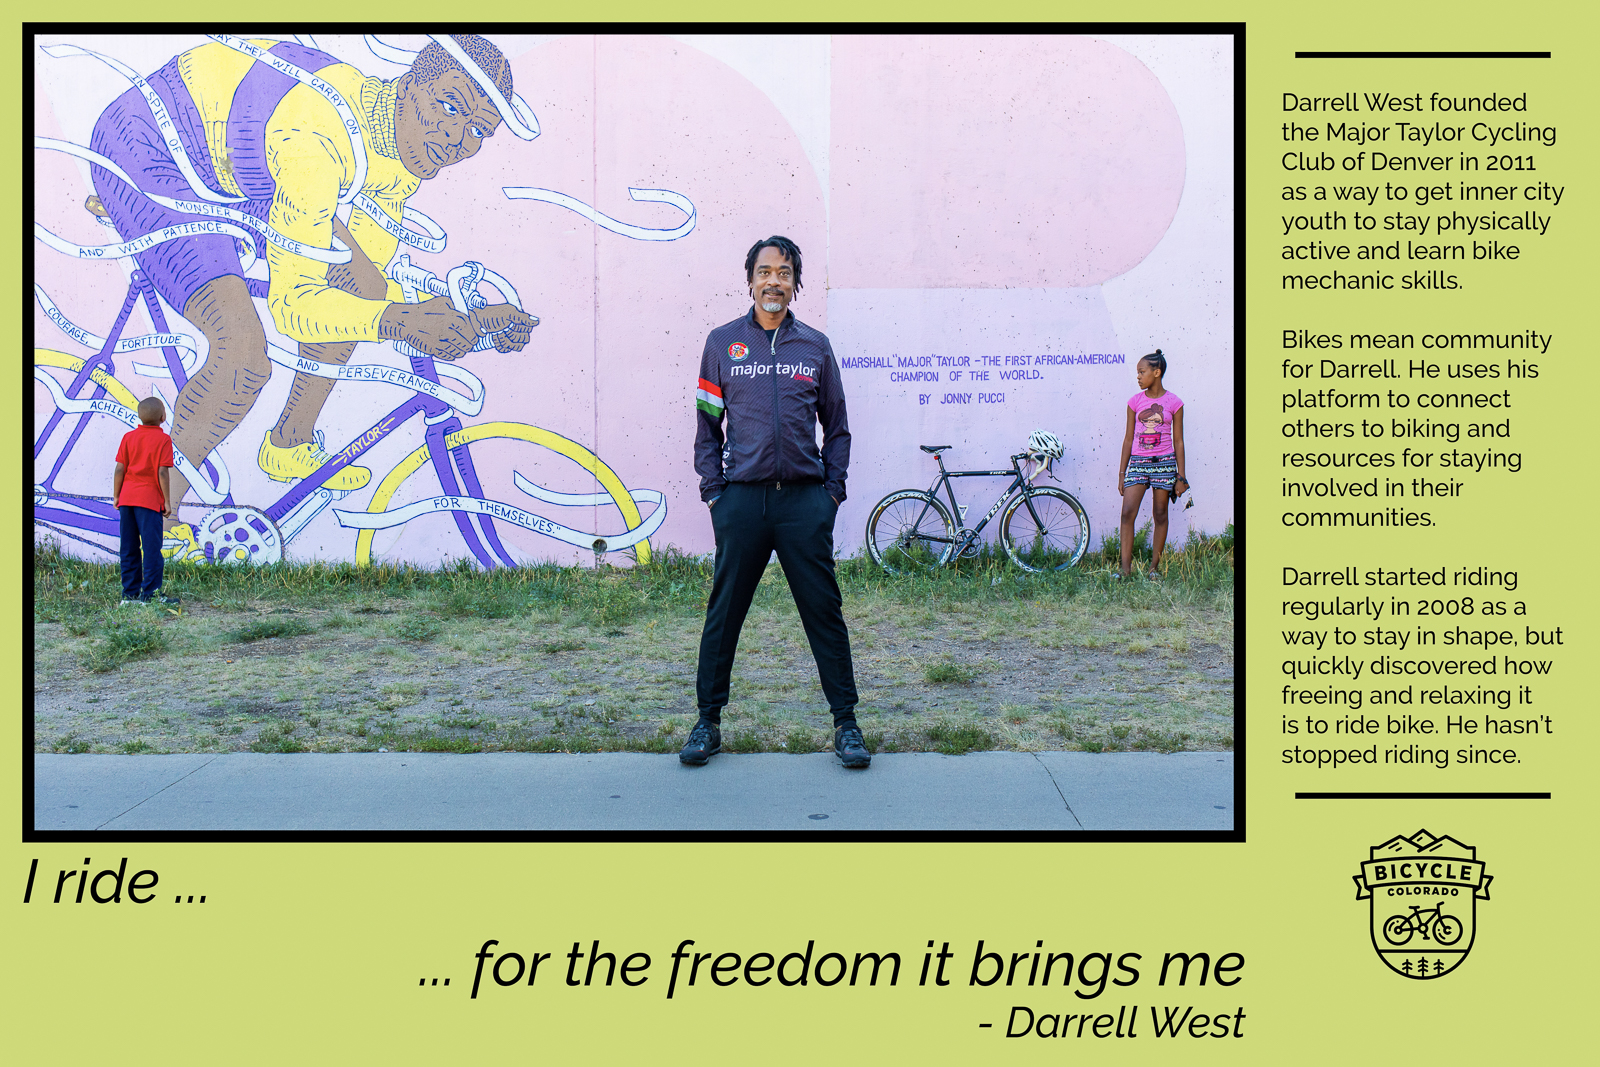 A "why I ride" graphic with Darrell West, posing in front of the a mural of Major Taylor, with two children and a bicycle. The text reads "I ride for the freedom it brings me. Darrell West founded the Major Taylor Cycling Club of Denver in 2011 as a way to get inner city youth to stay physically active and learn bike mechanic skills. Bikes mean community for Darrell. He uses his platform to connect others to biking and resources for staying involved in their communities. Darrell started riding regularly in 2008 as a way to stay in shape, but quickly discovered how freeing and relaxing it is to ride bikes. He hasn't stopped riding since."